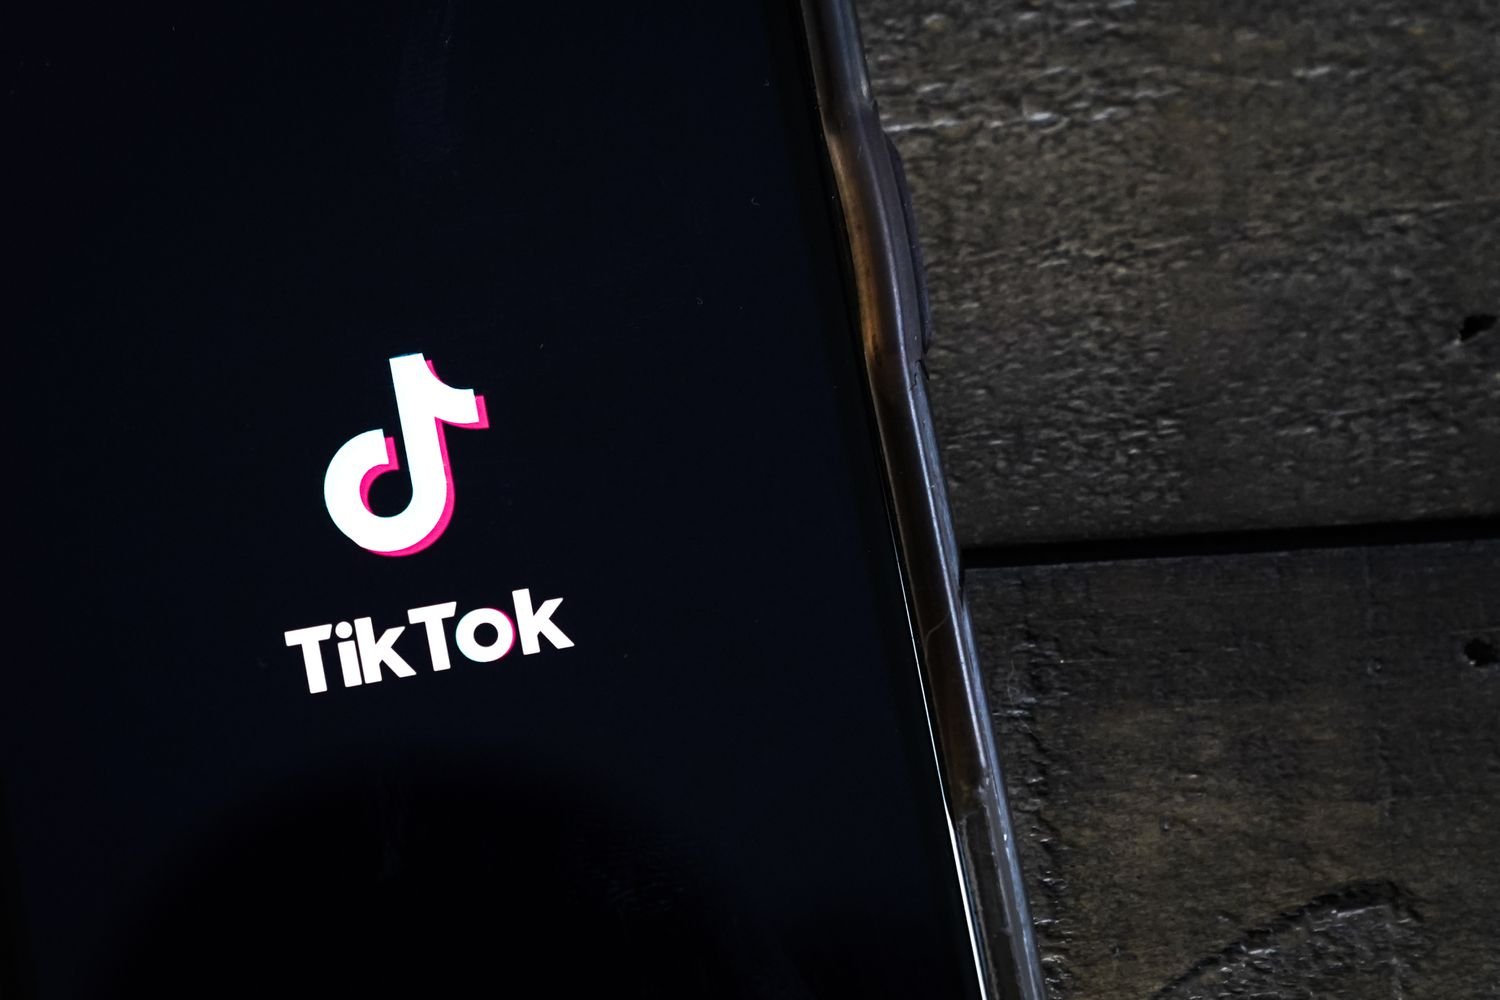 What Would a US Ban on TikTok Mean for Businesses?